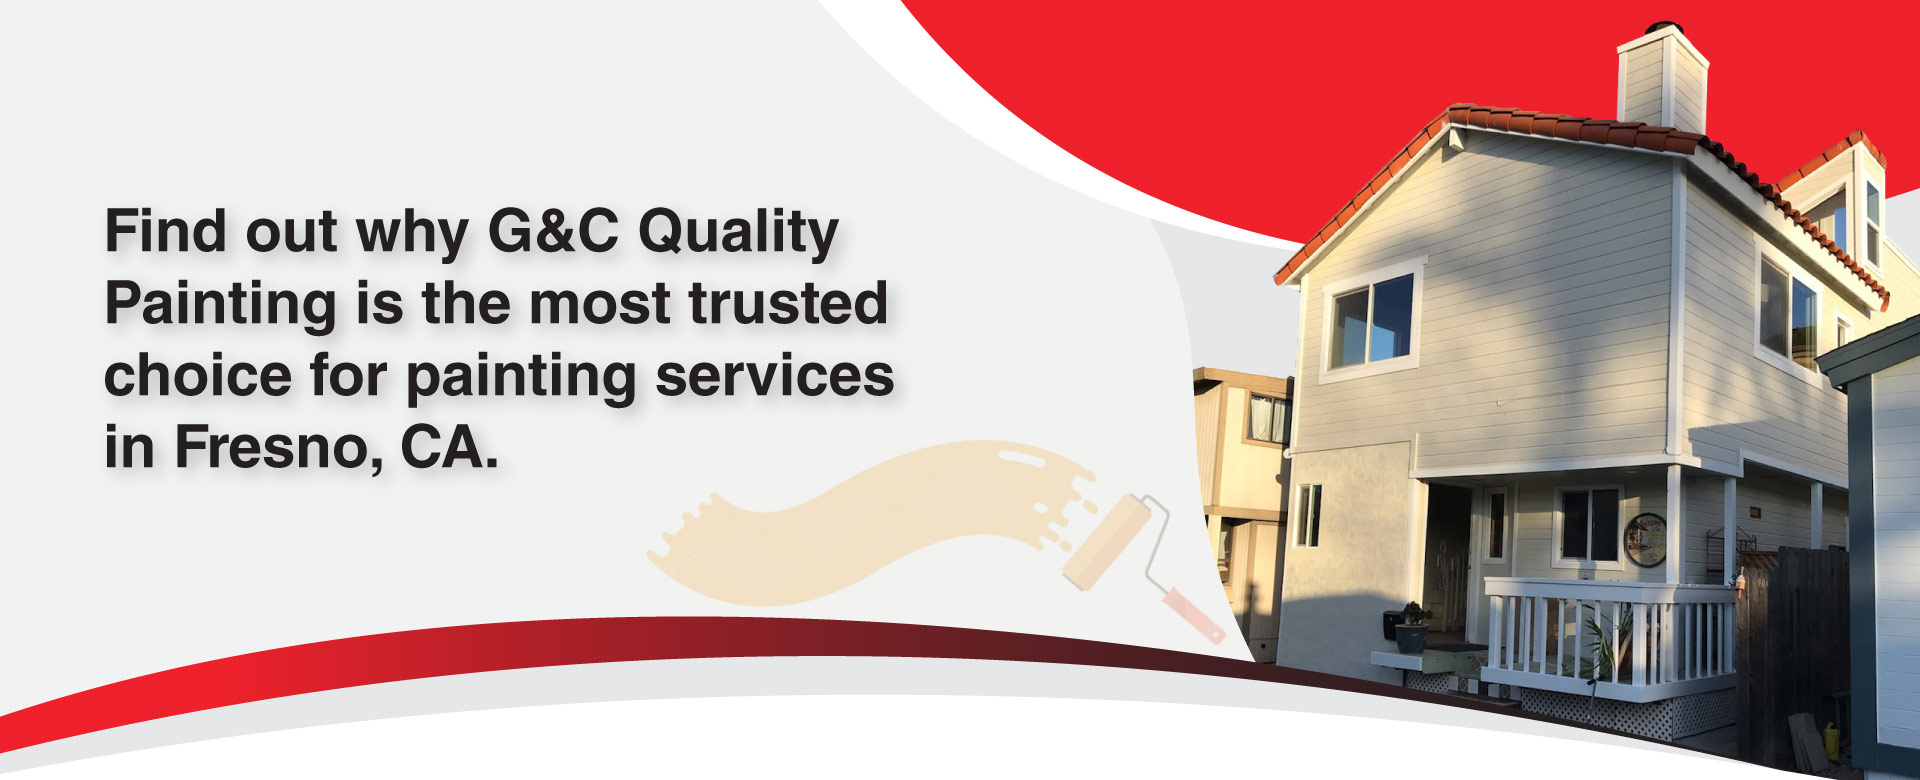 most trusted choice for painting services in fresno